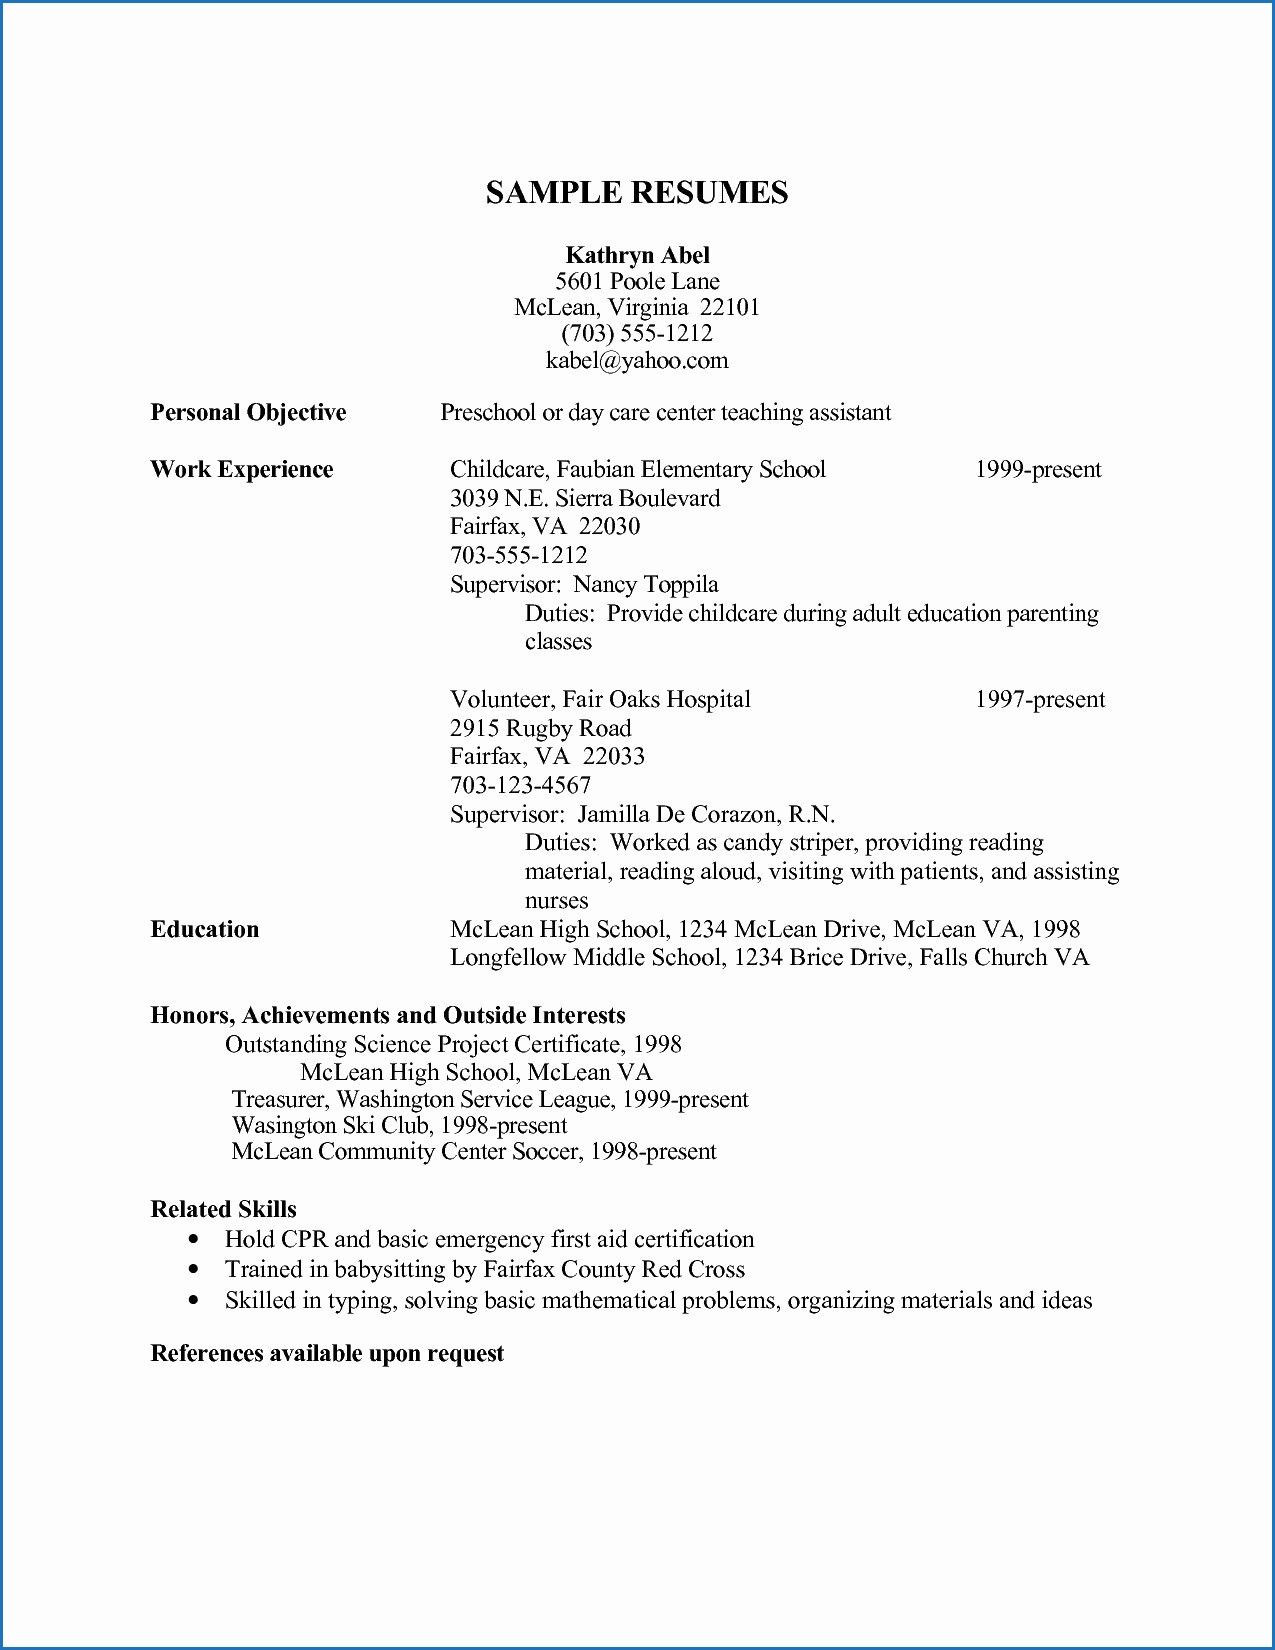 Sample Resume Objective for Child Care Child Care assistant Skills Resume 2021 – Shefalitayal